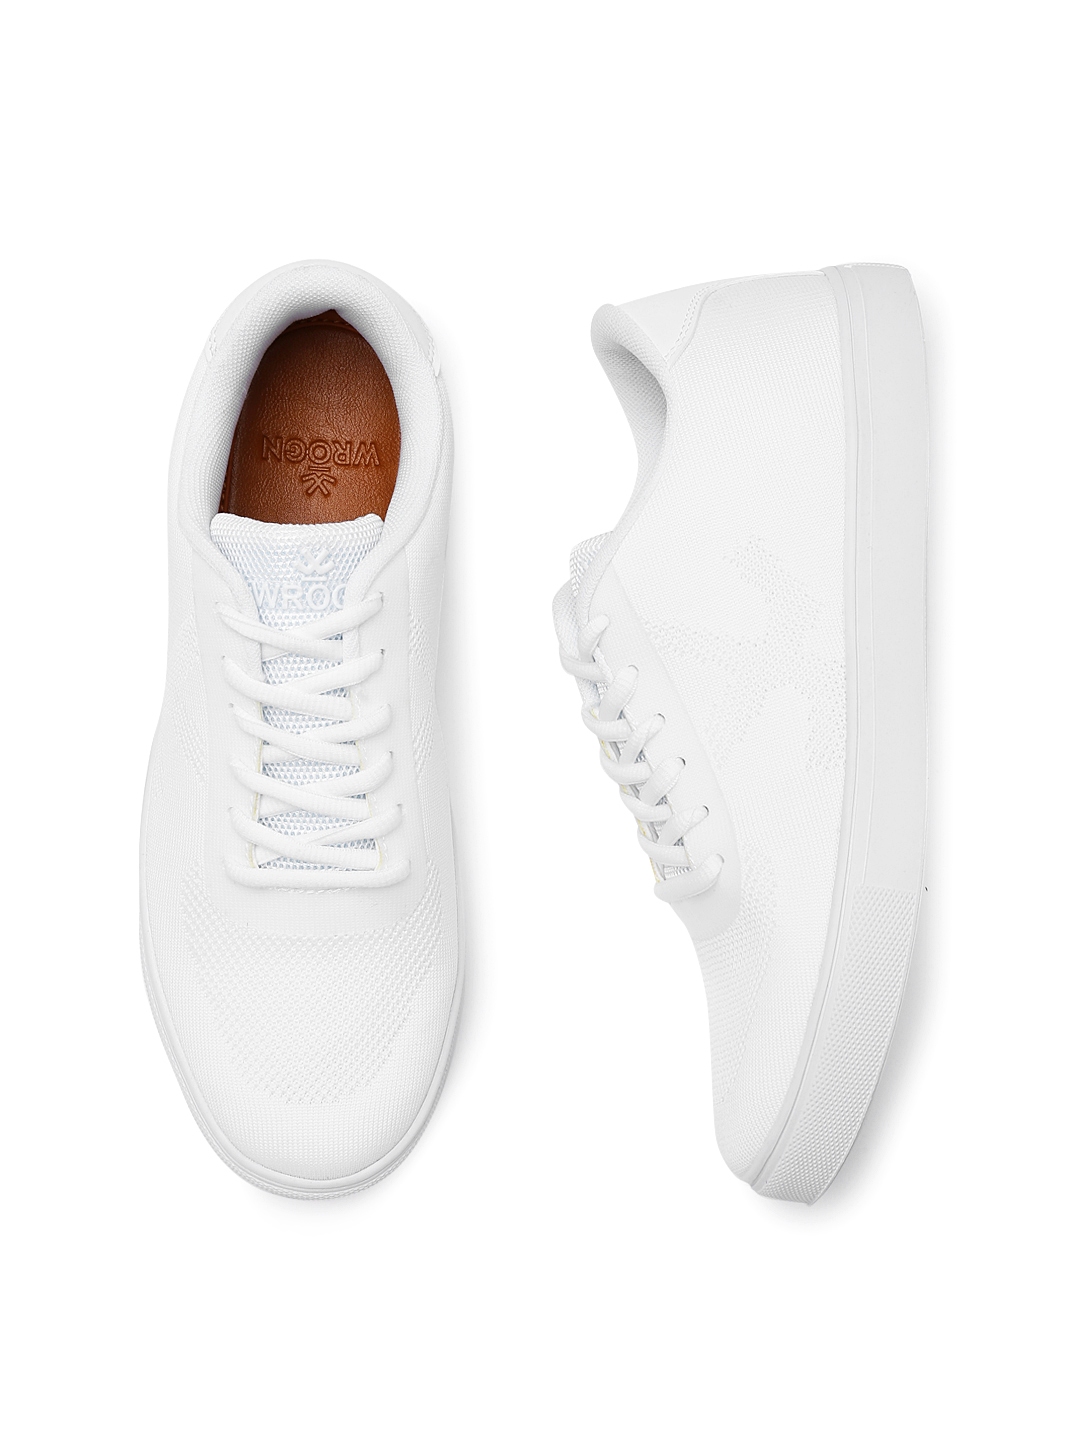 wrogn white shoes